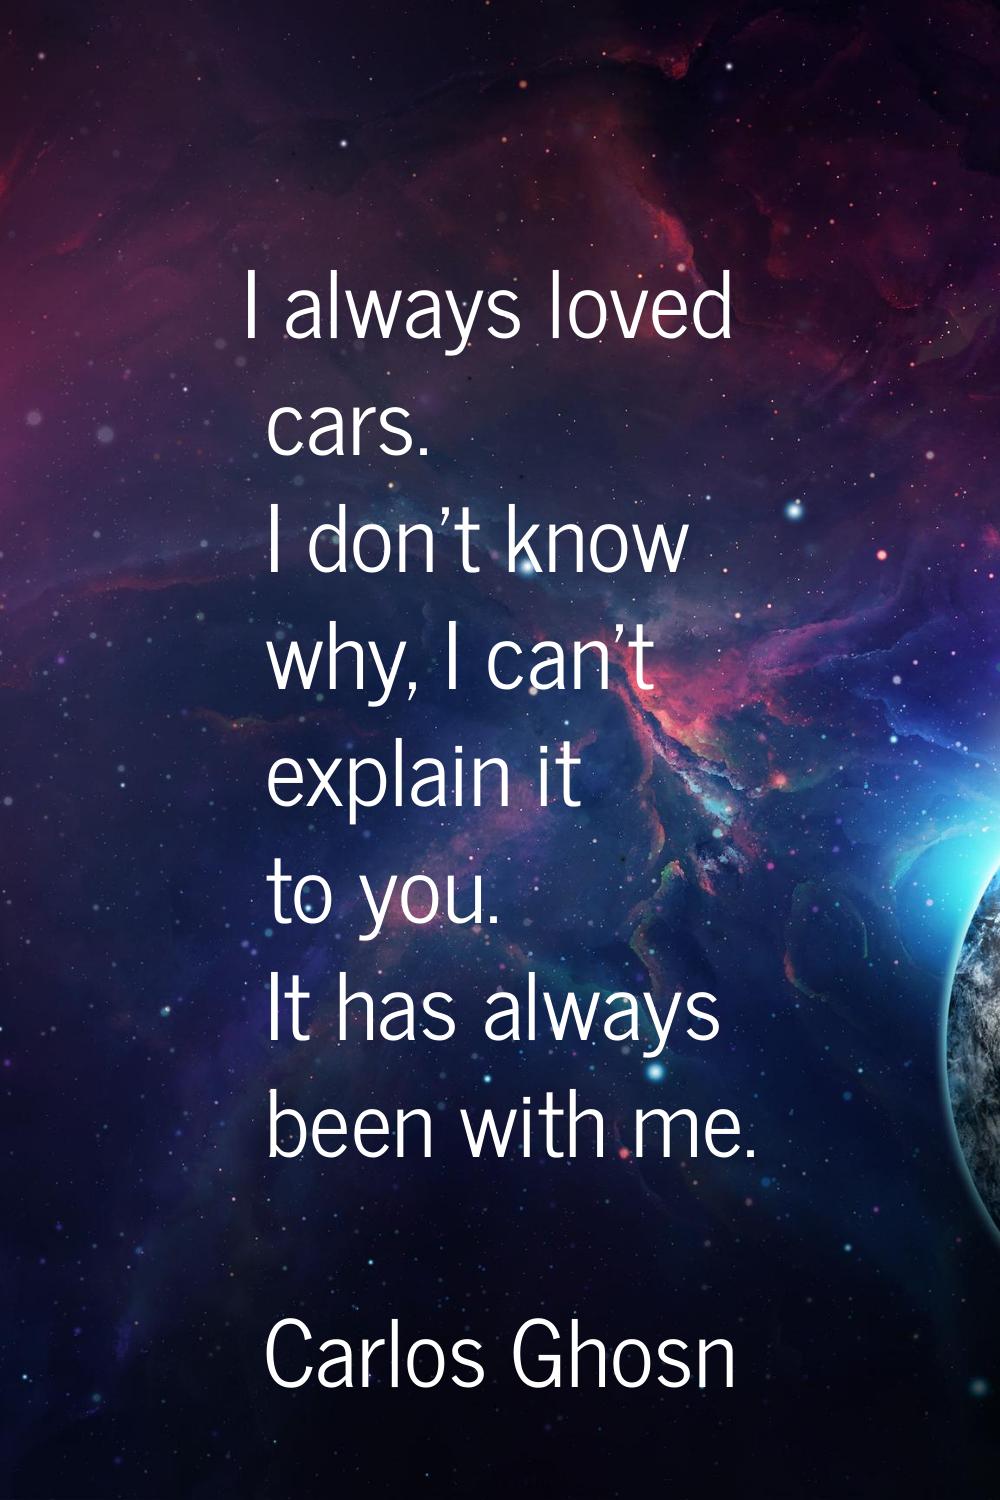 I always loved cars. I don't know why, I can't explain it to you. It has always been with me.